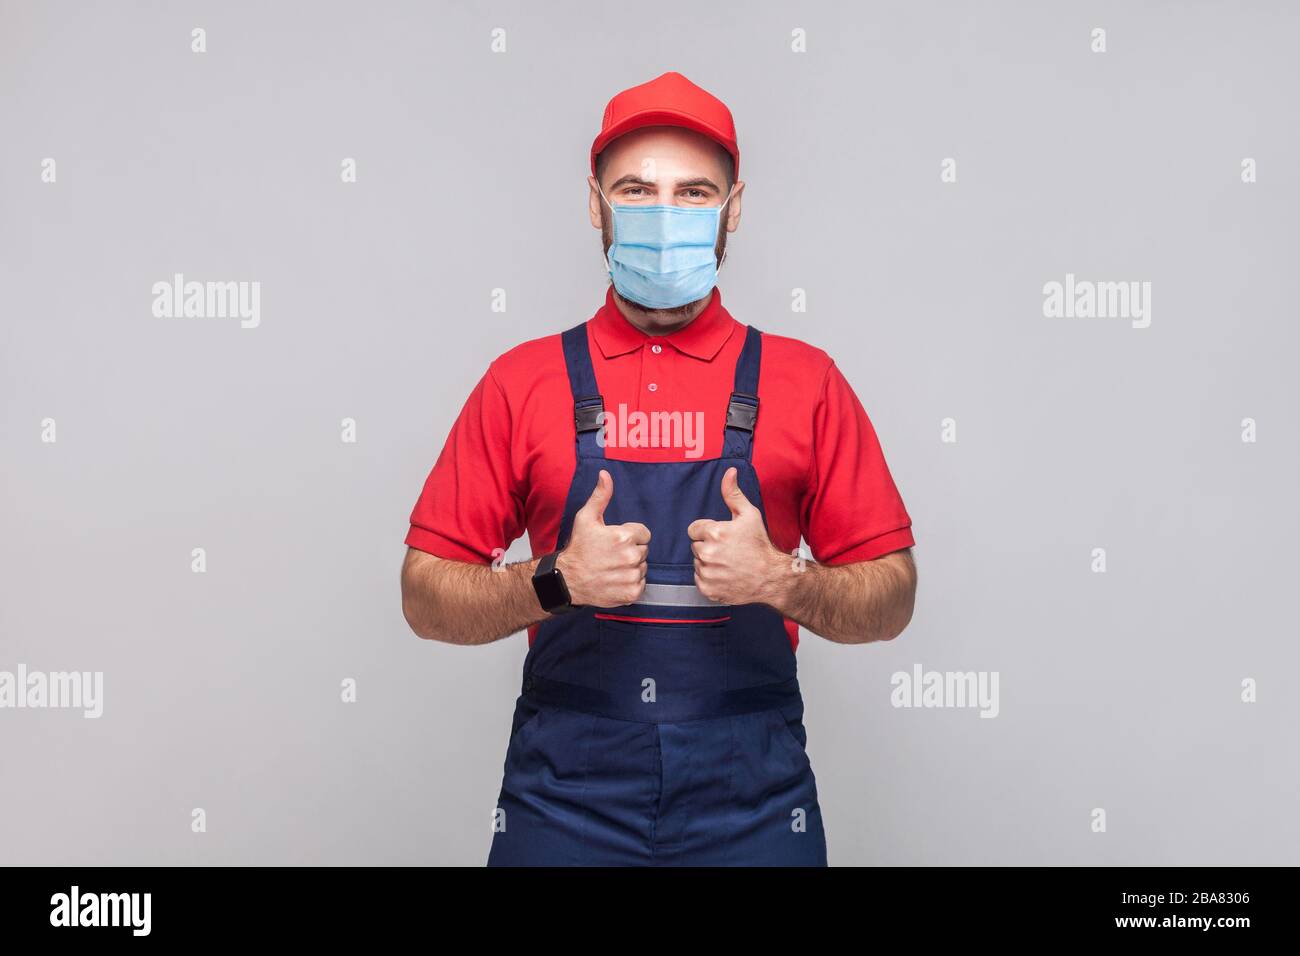 Work are done! Portrait of young man with surgical medical mask in blue overall, red t-shirt , cap, standing and showing thumps up and looking at came Stock Photo